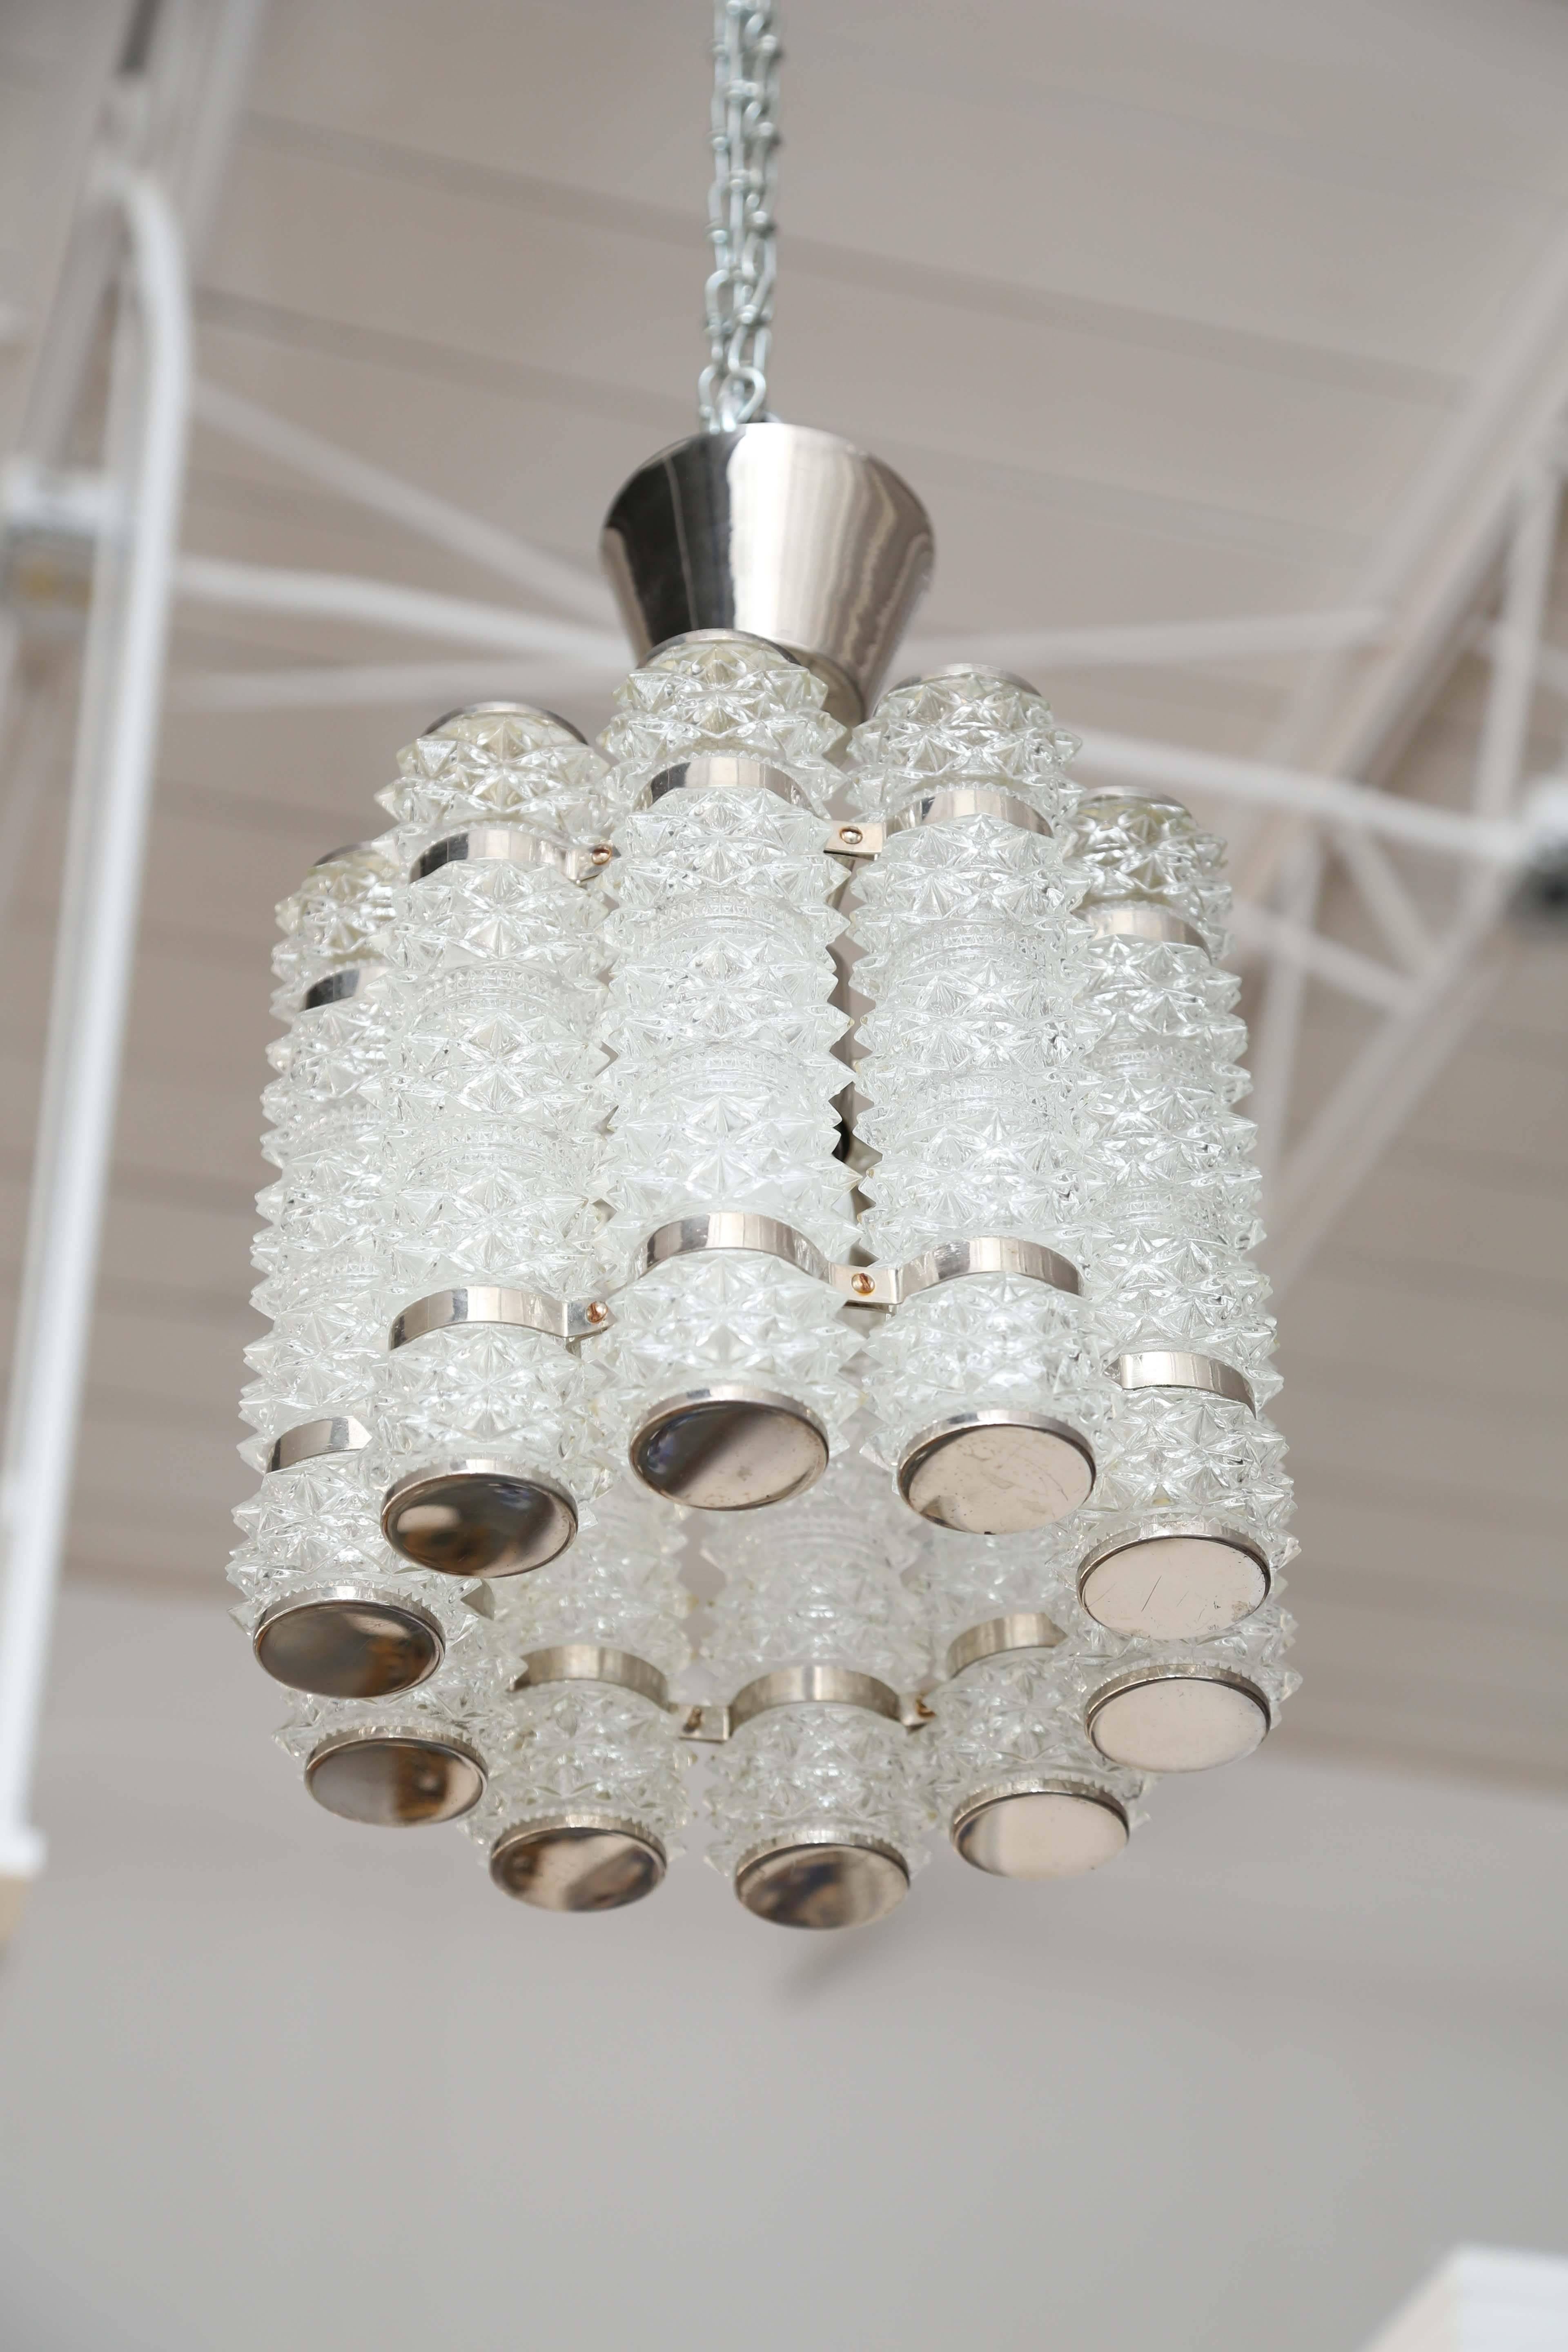 Orrefors chrome and crystal round pendant fixture By Tyringe Crafts.
10 faceted crystal cylinders attached by chrome curved supports and chrome caps top and bottom. Takes one standard Edison light bulb 60 watt max  in centre. 
Has been rewired to